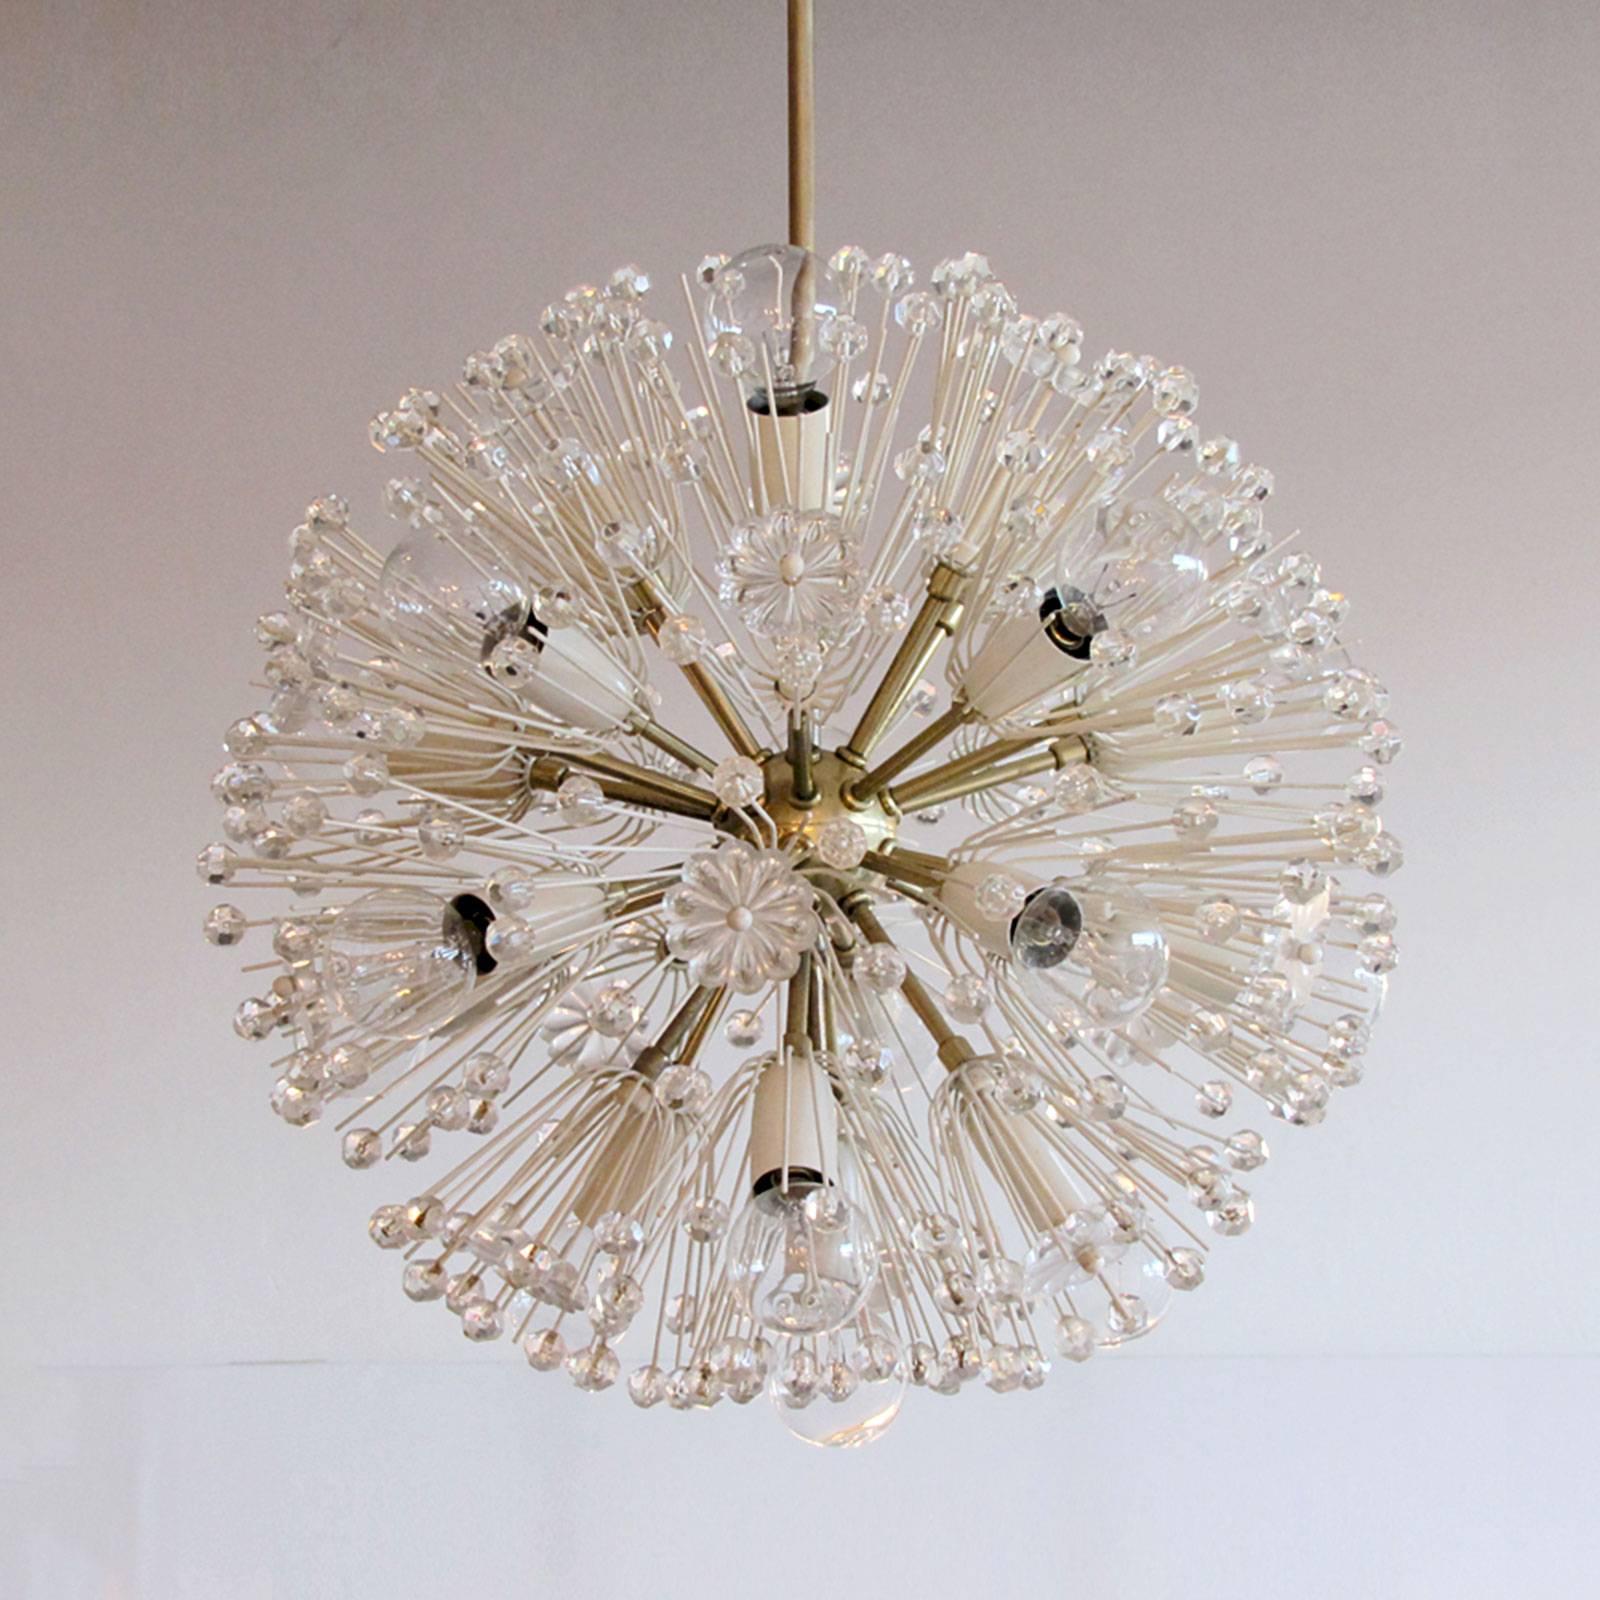 Beautiful and delicate sixteen-light brass fixture by Emil Stejnar for Nikoll with copious amounts of Austrian crystals, rewired for US J-boxes, overall height can be adjusted, max. wattage 25 W per socket.